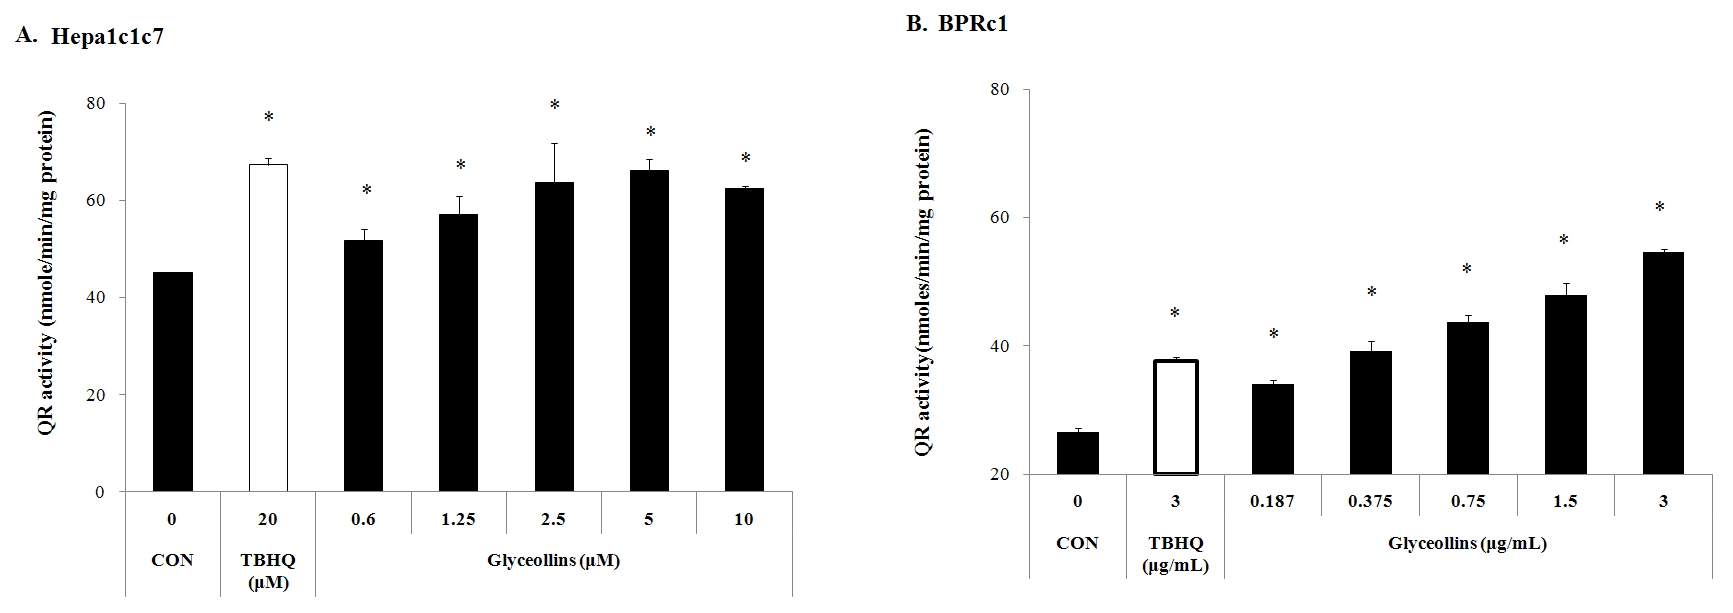 QR-inducing activity of glyceollins in Hepa1c1c7 and BPRc1 cells.